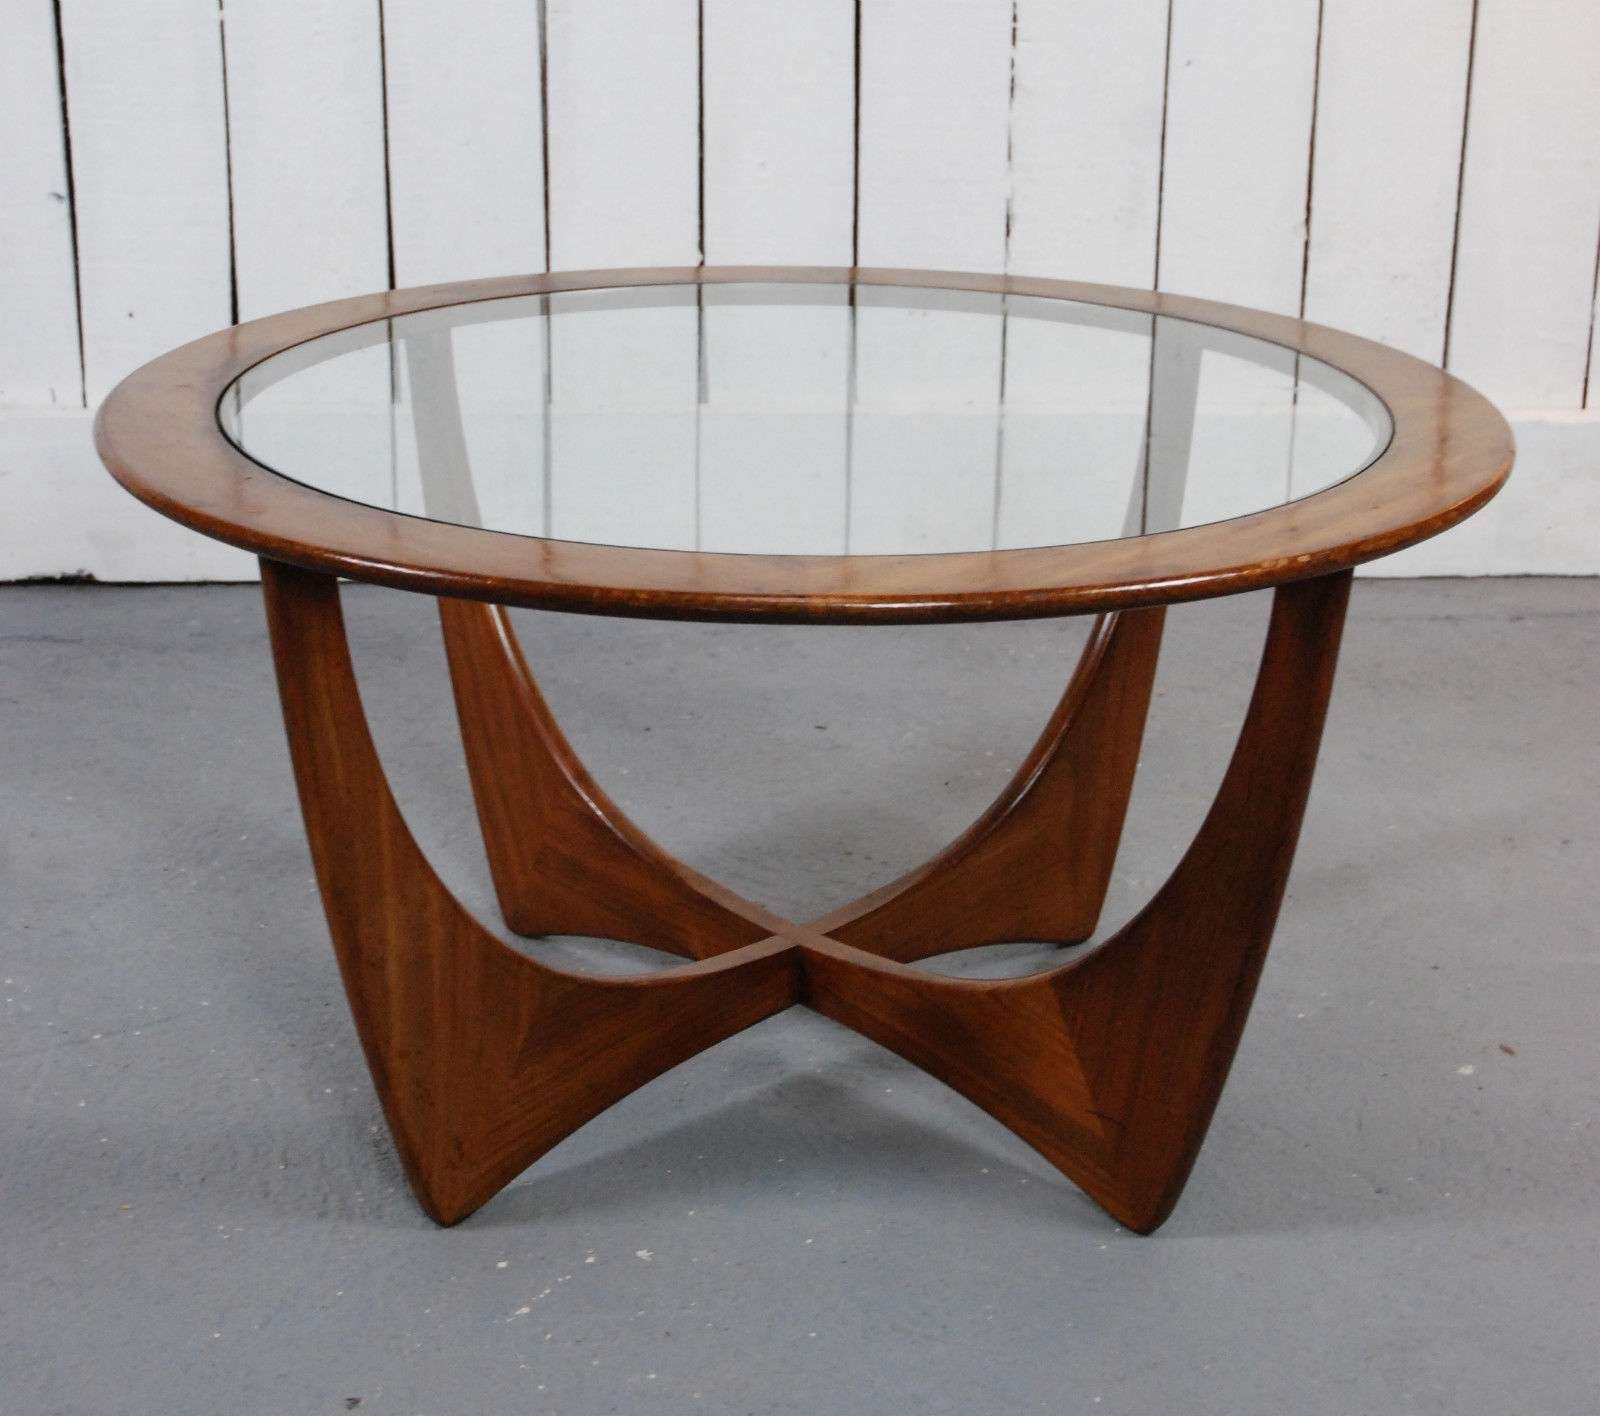 Modern Teak Round Coffee Table — New Home Design : Making Teak Intended For Preferred Retro Glass Coffee Tables (View 1 of 20)